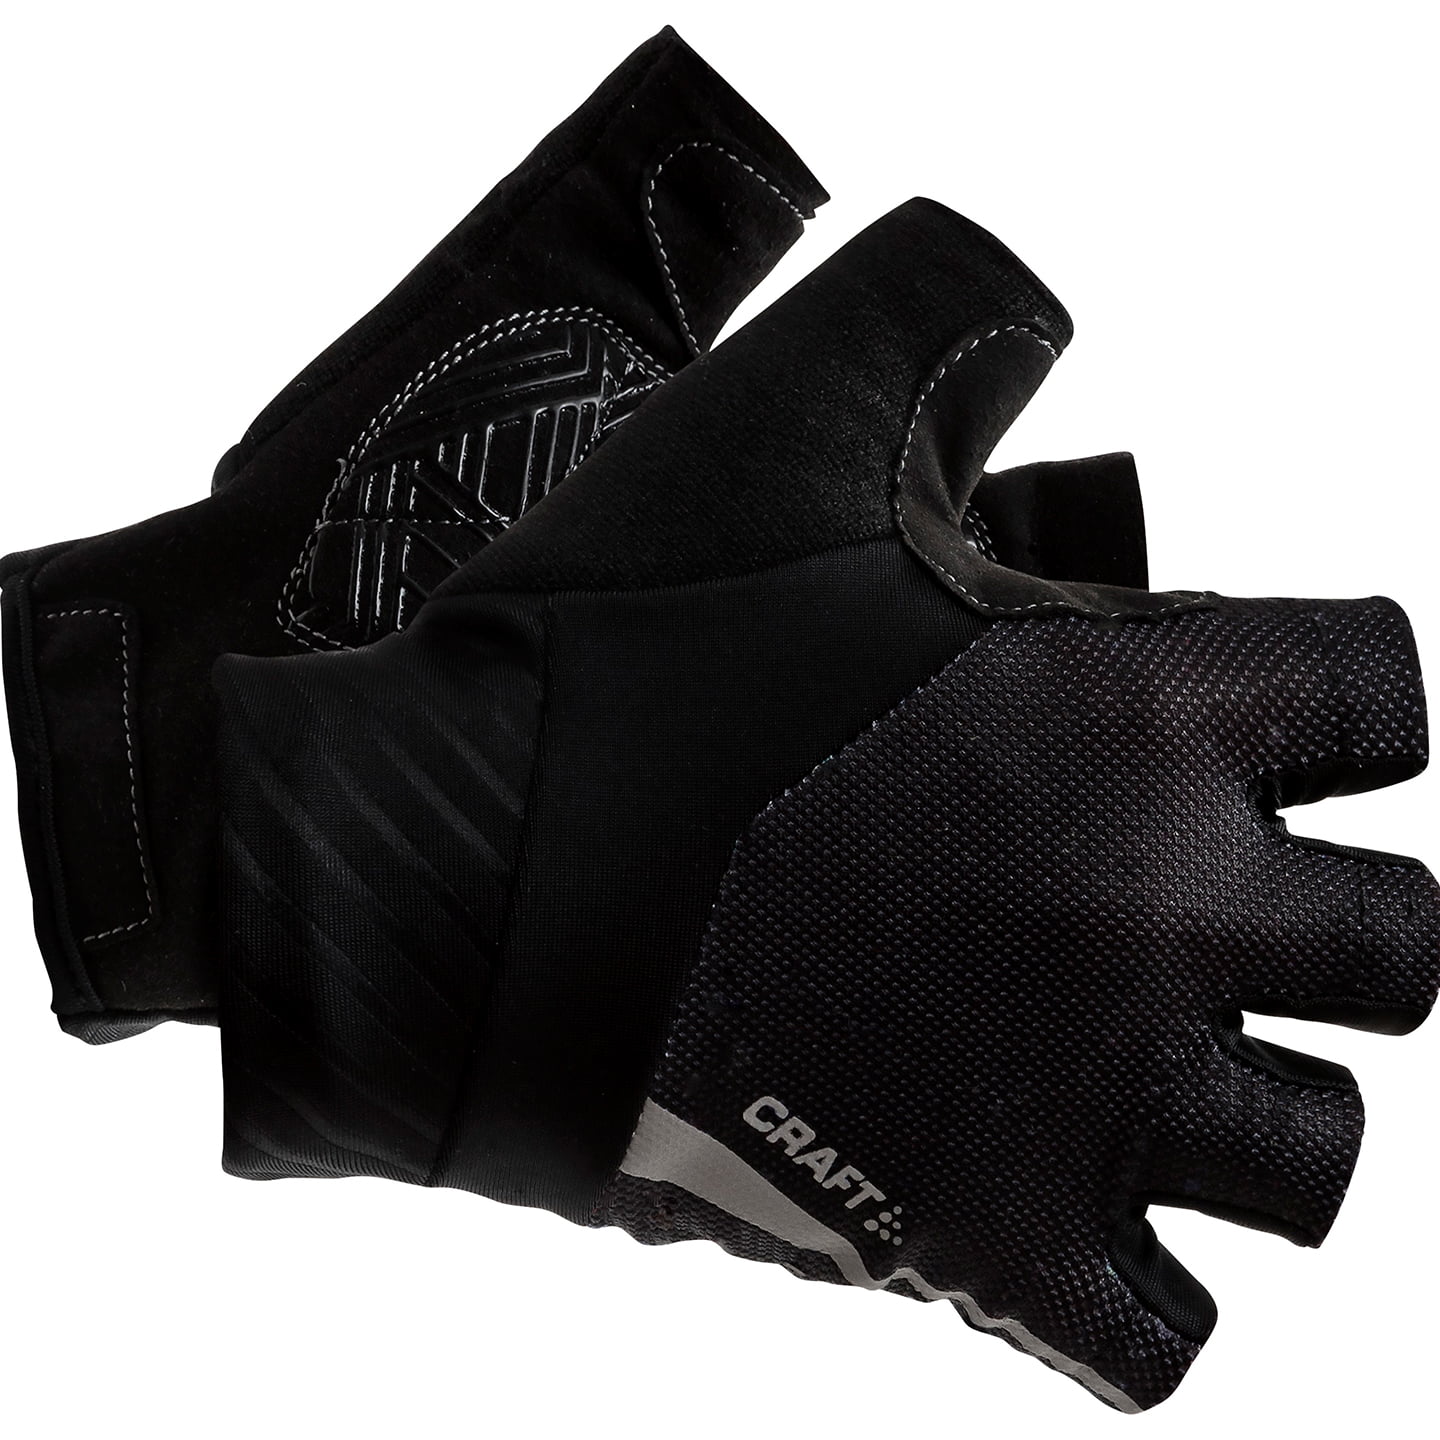 CRAFT Gloves Rouleur Cycling Gloves, for men, size M, Cycling gloves, Cycling gear